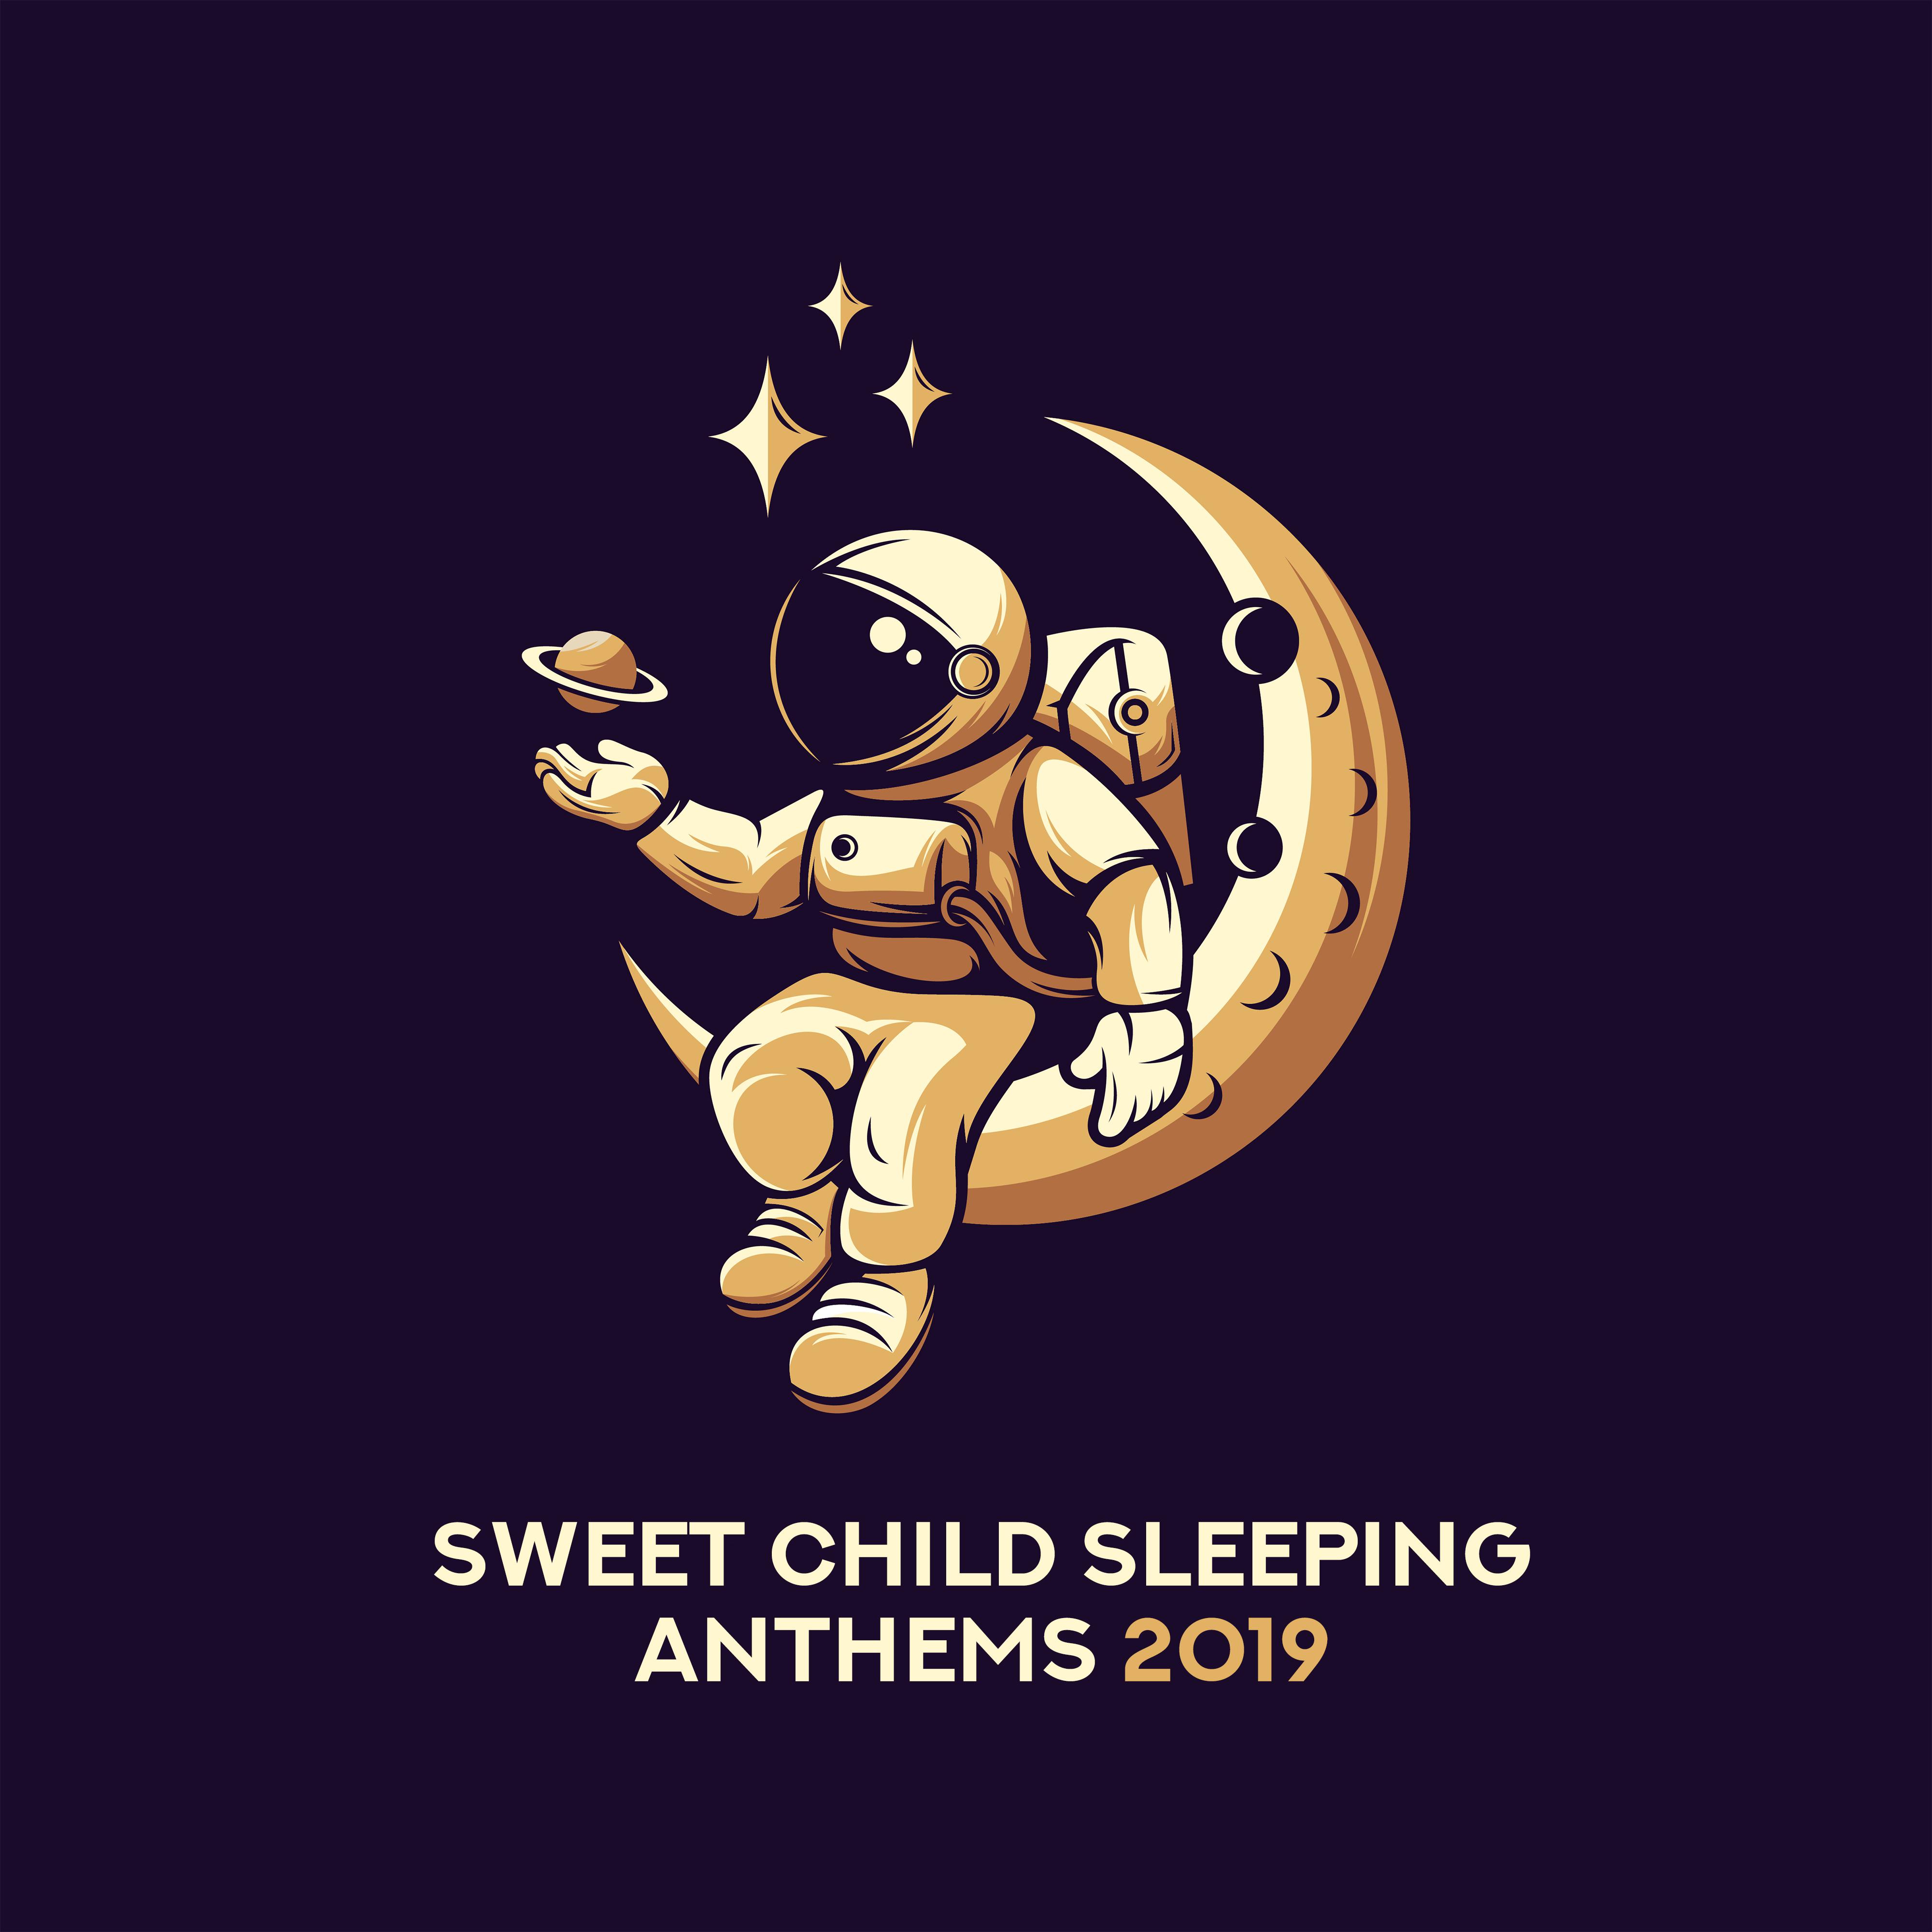 Sweet Child Sleeping Anthems 2019  Piano Jazz Compilation for Perfect Sleep, Calm Night, Cure Insomnia